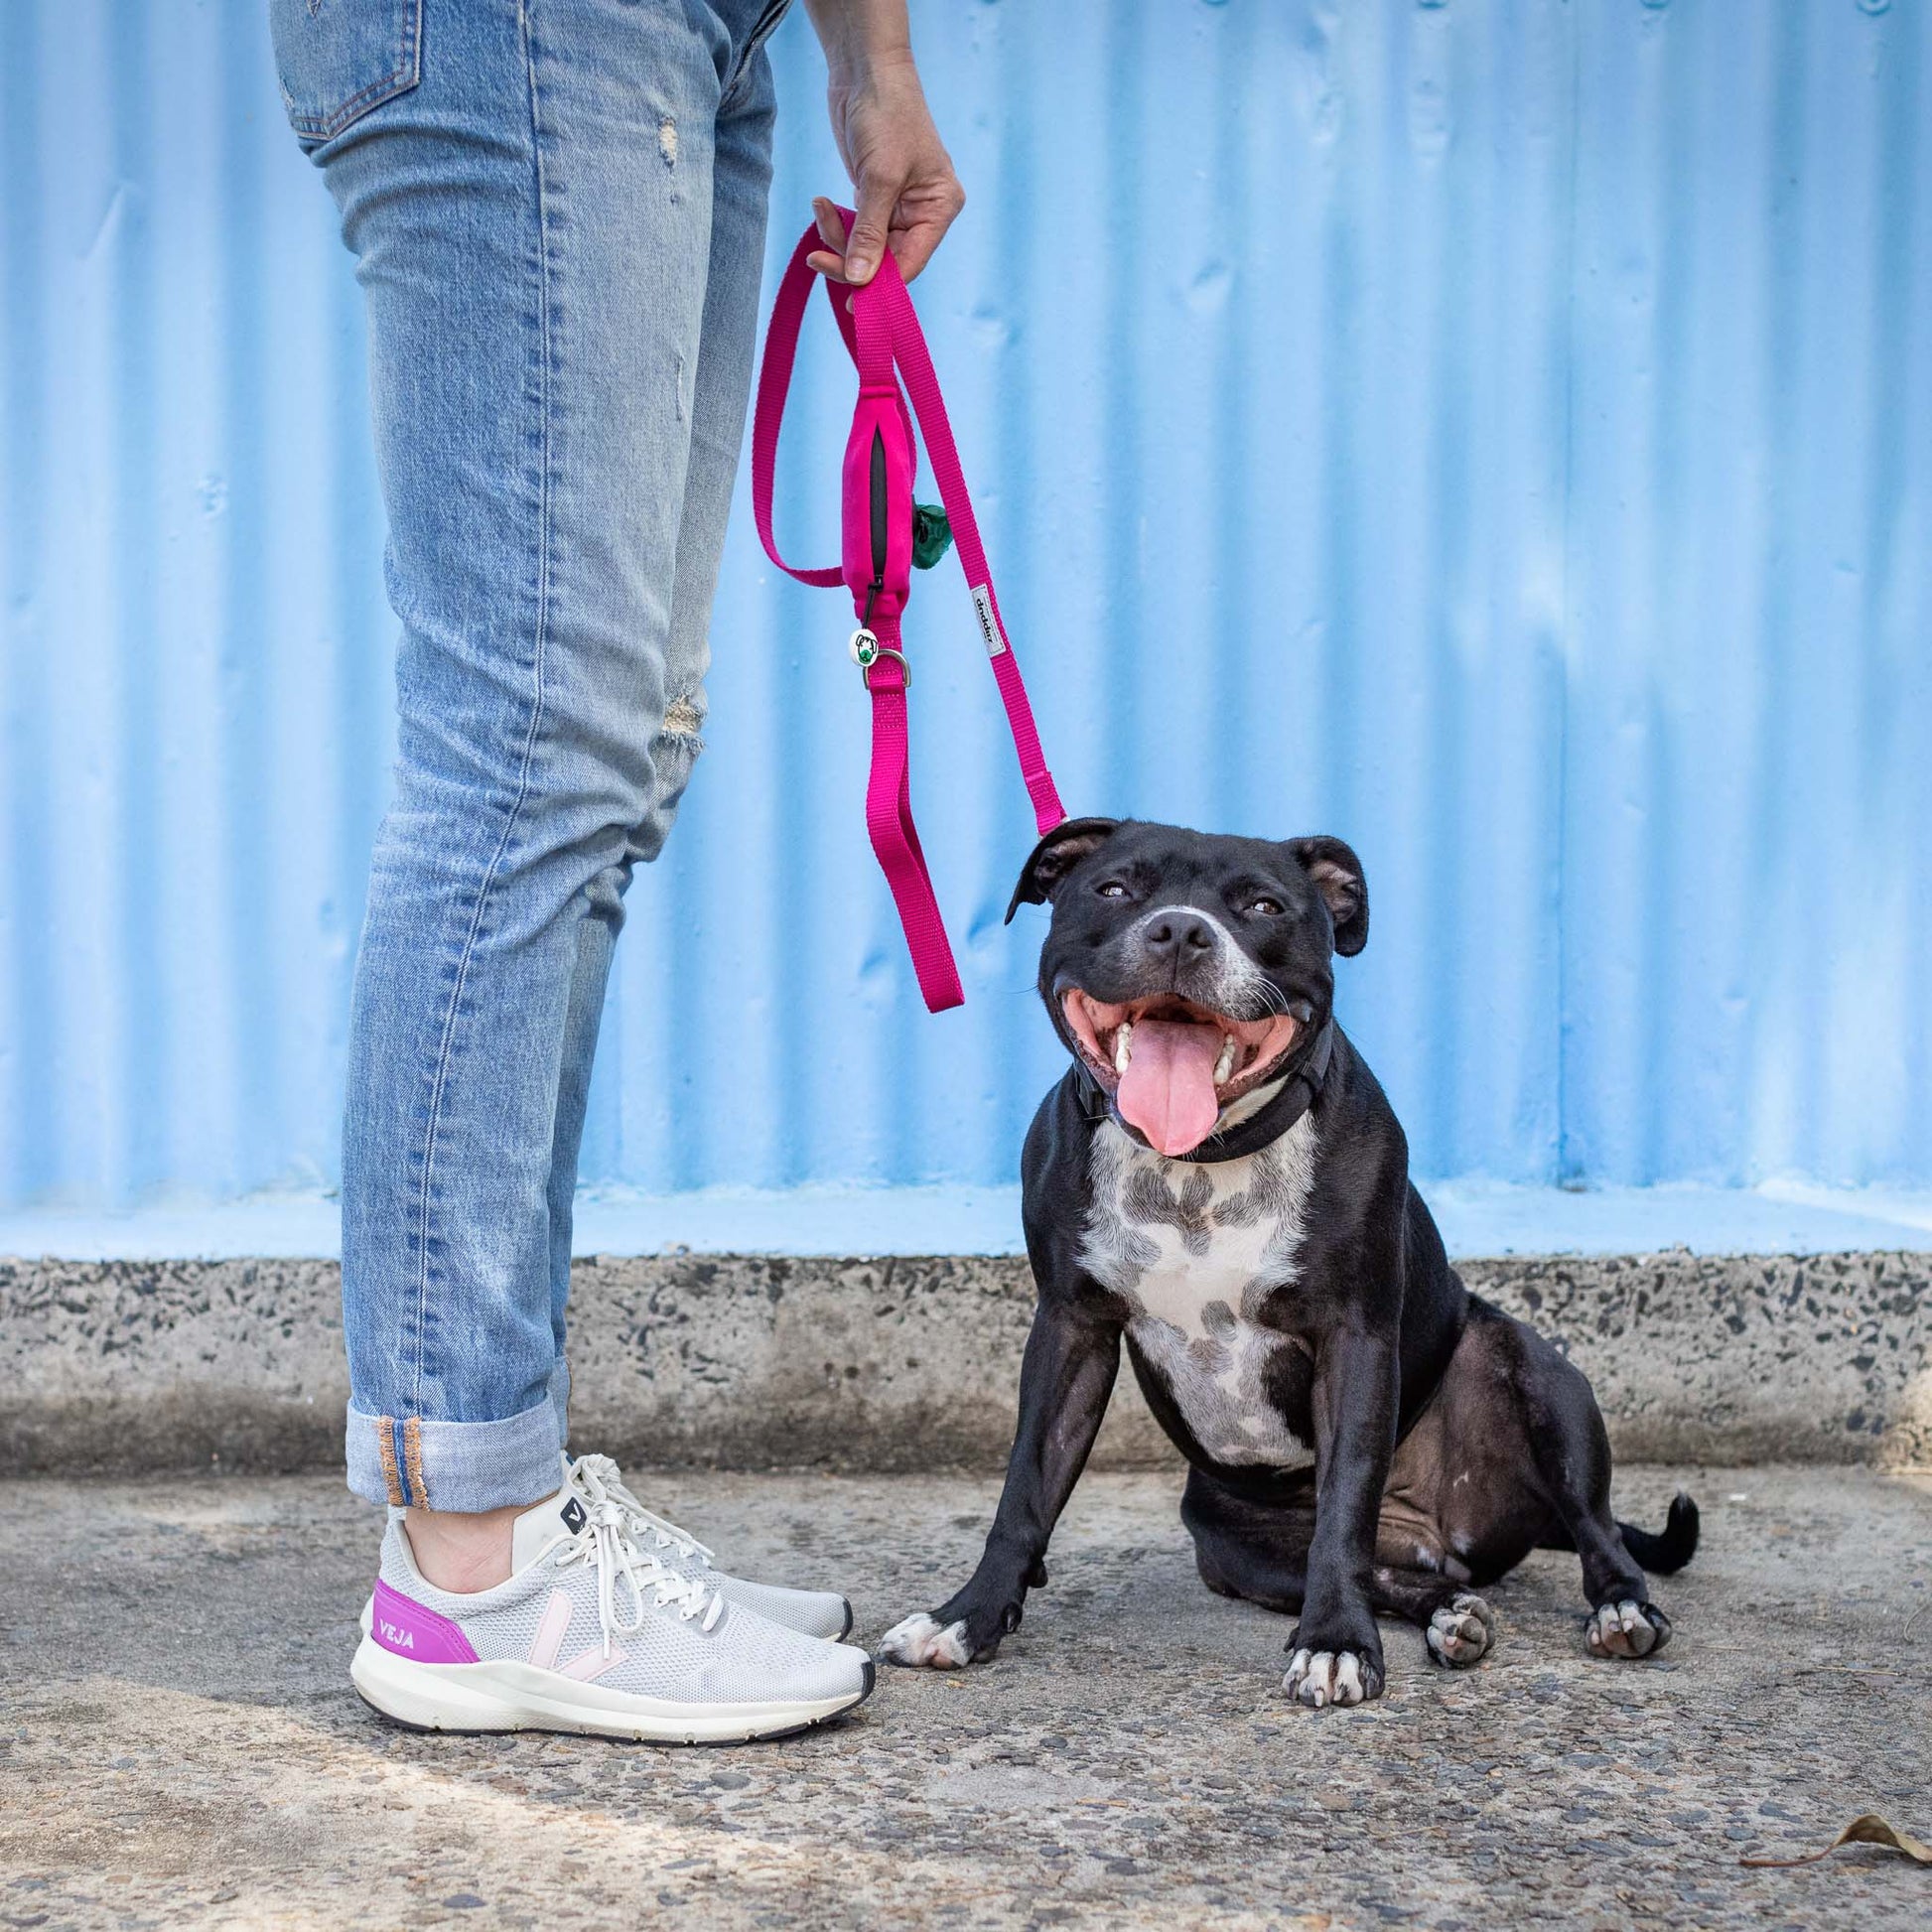 Black and white staffy wearing pink dog lead